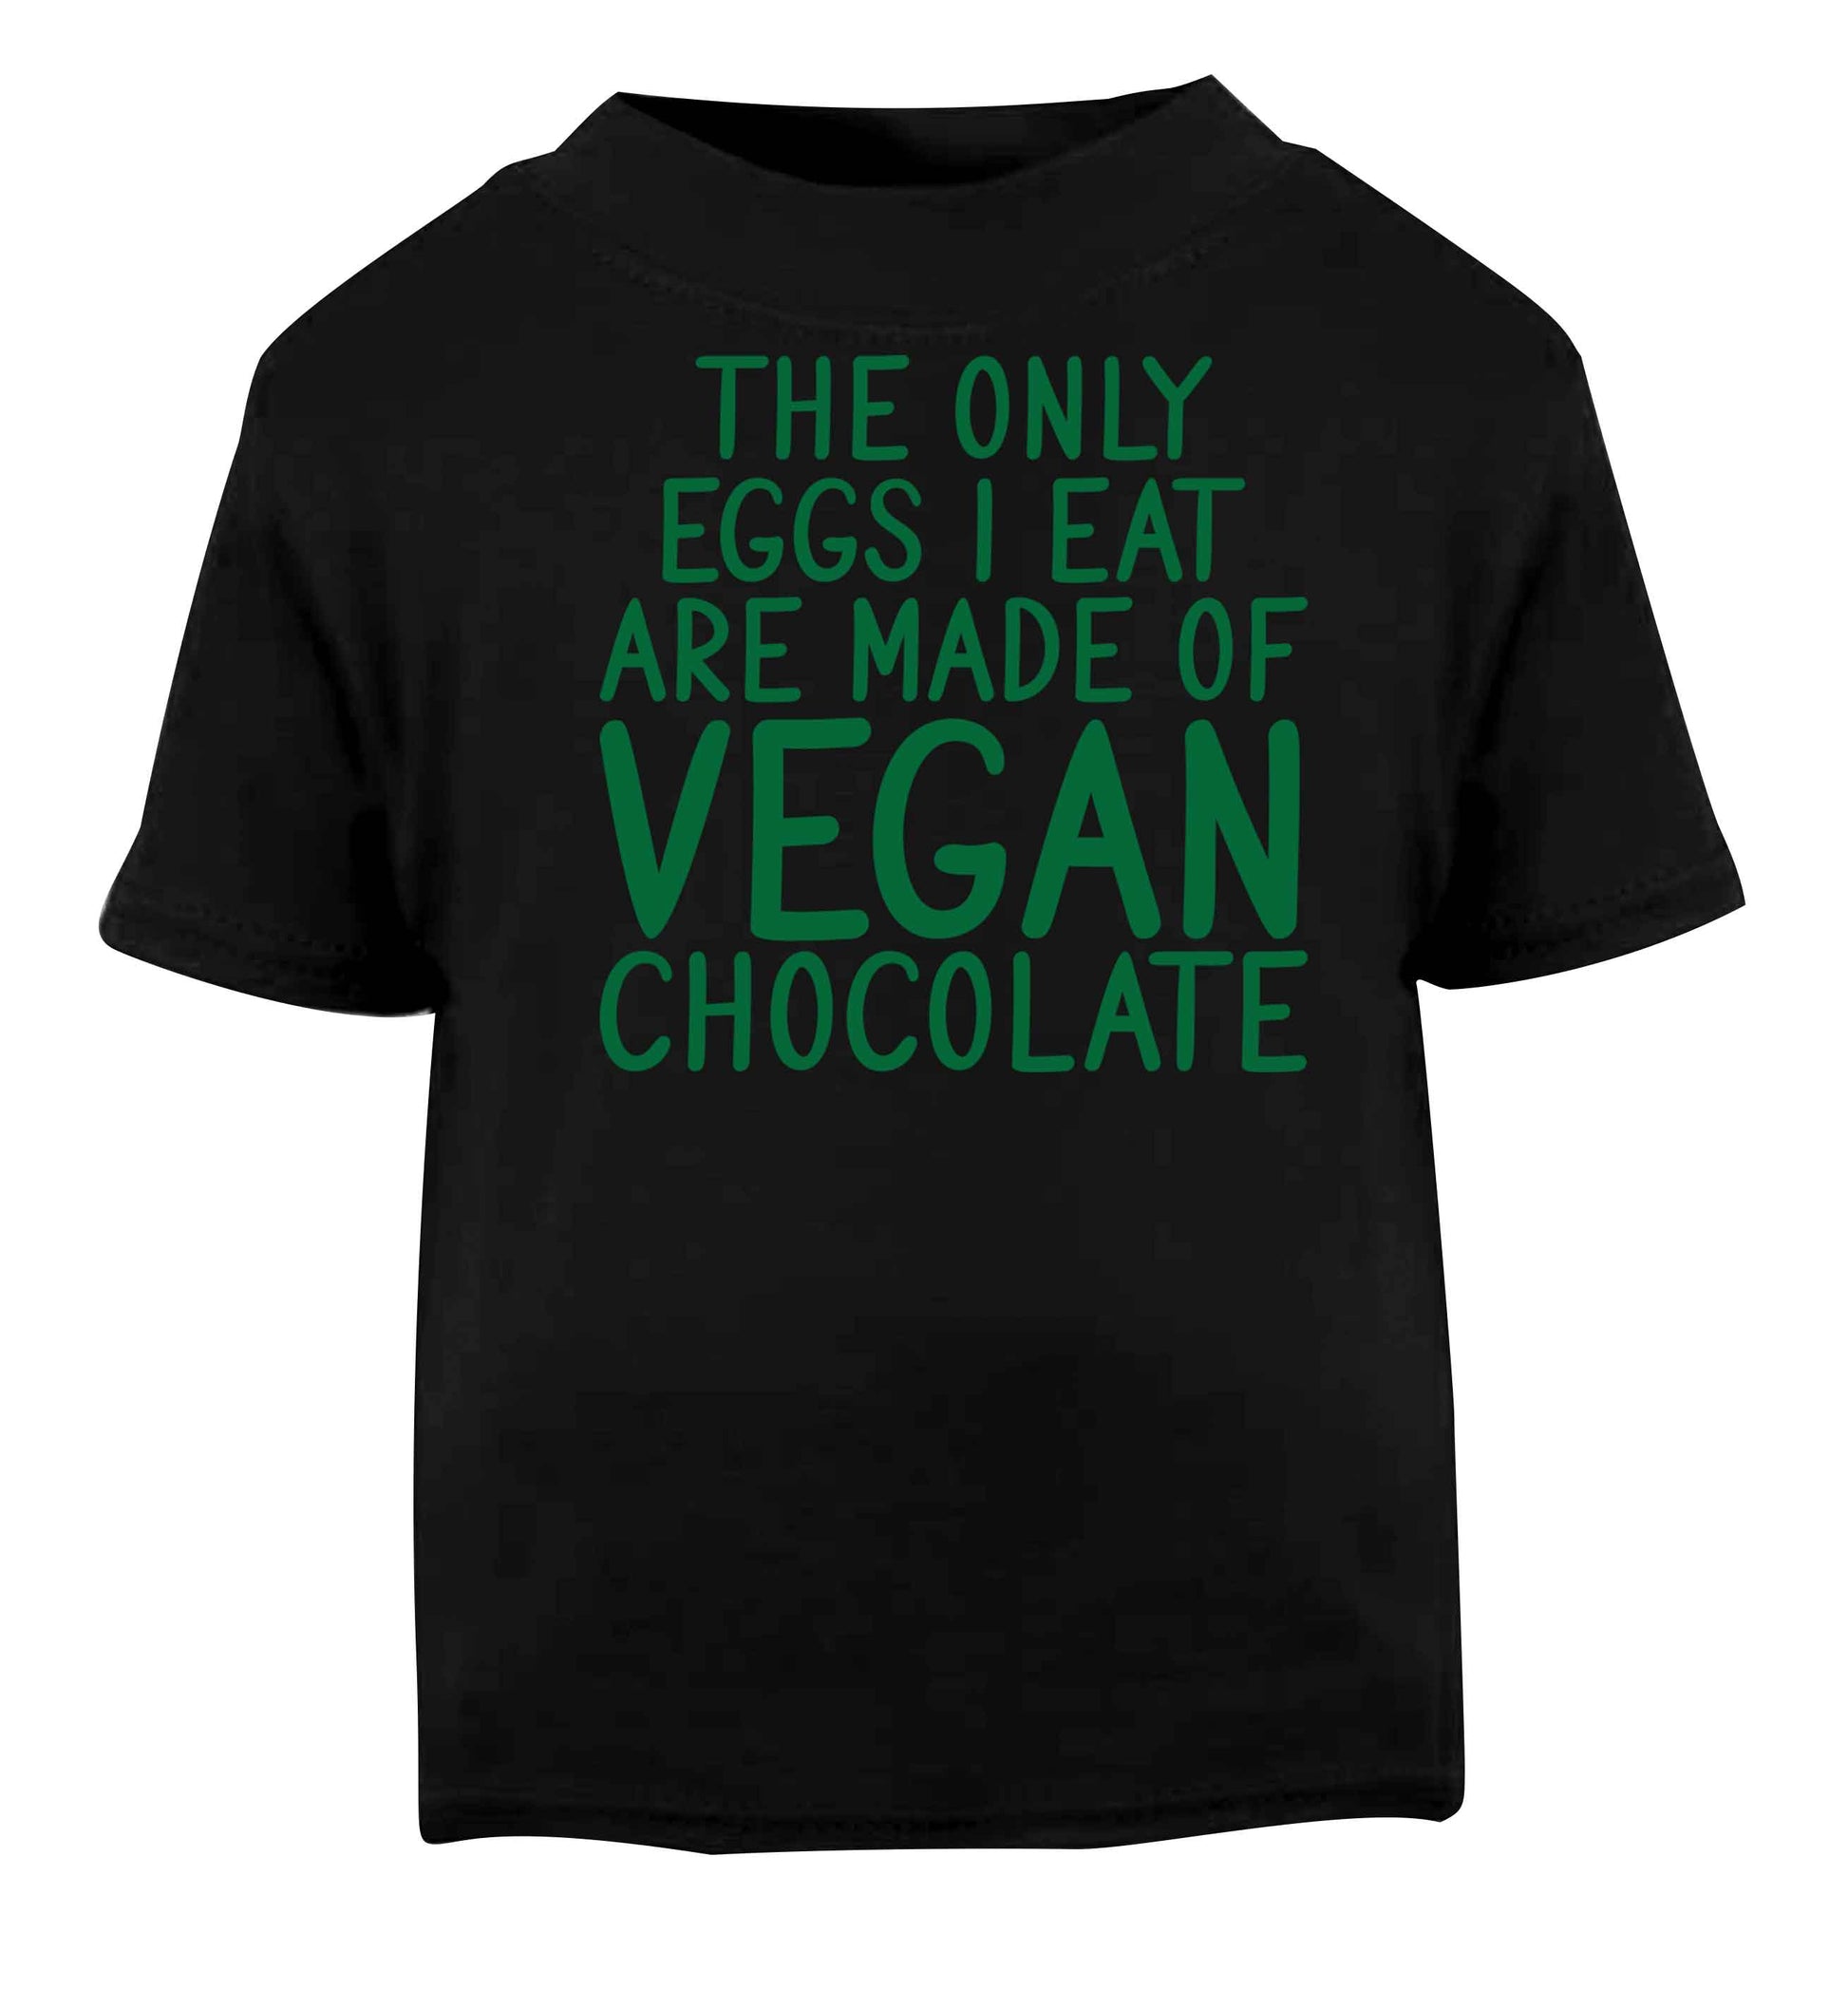 The only eggs I eat are made of vegan chocolate Black baby toddler Tshirt 2 years